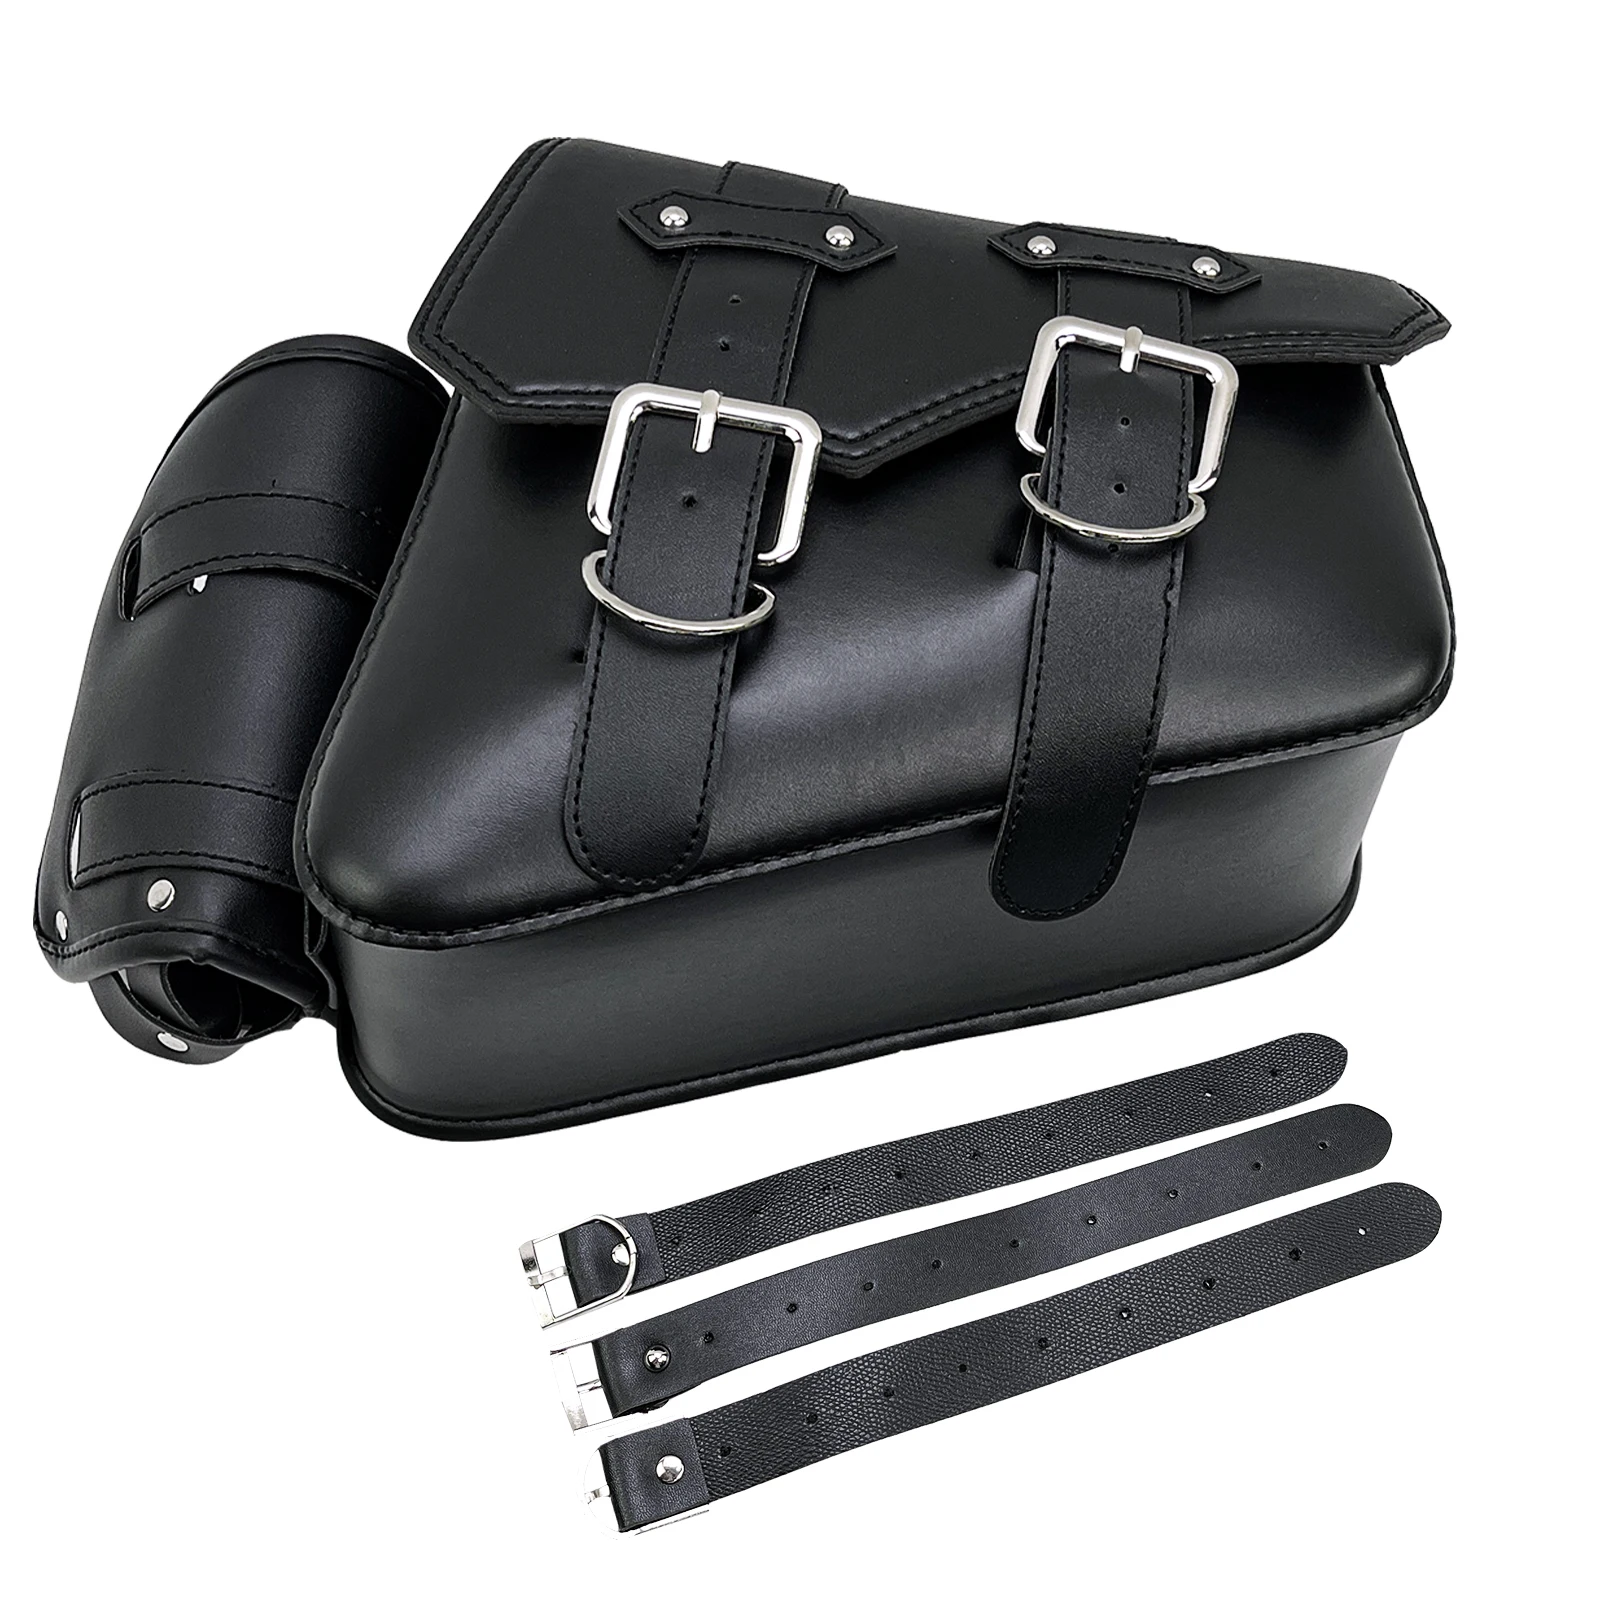 

PU Leather Motorcycle Saddlebags Side Tool Pouch Bag Luggage Saddle Bag Pouch Left/Right For Harley Sportster XL 883 1200 48 72